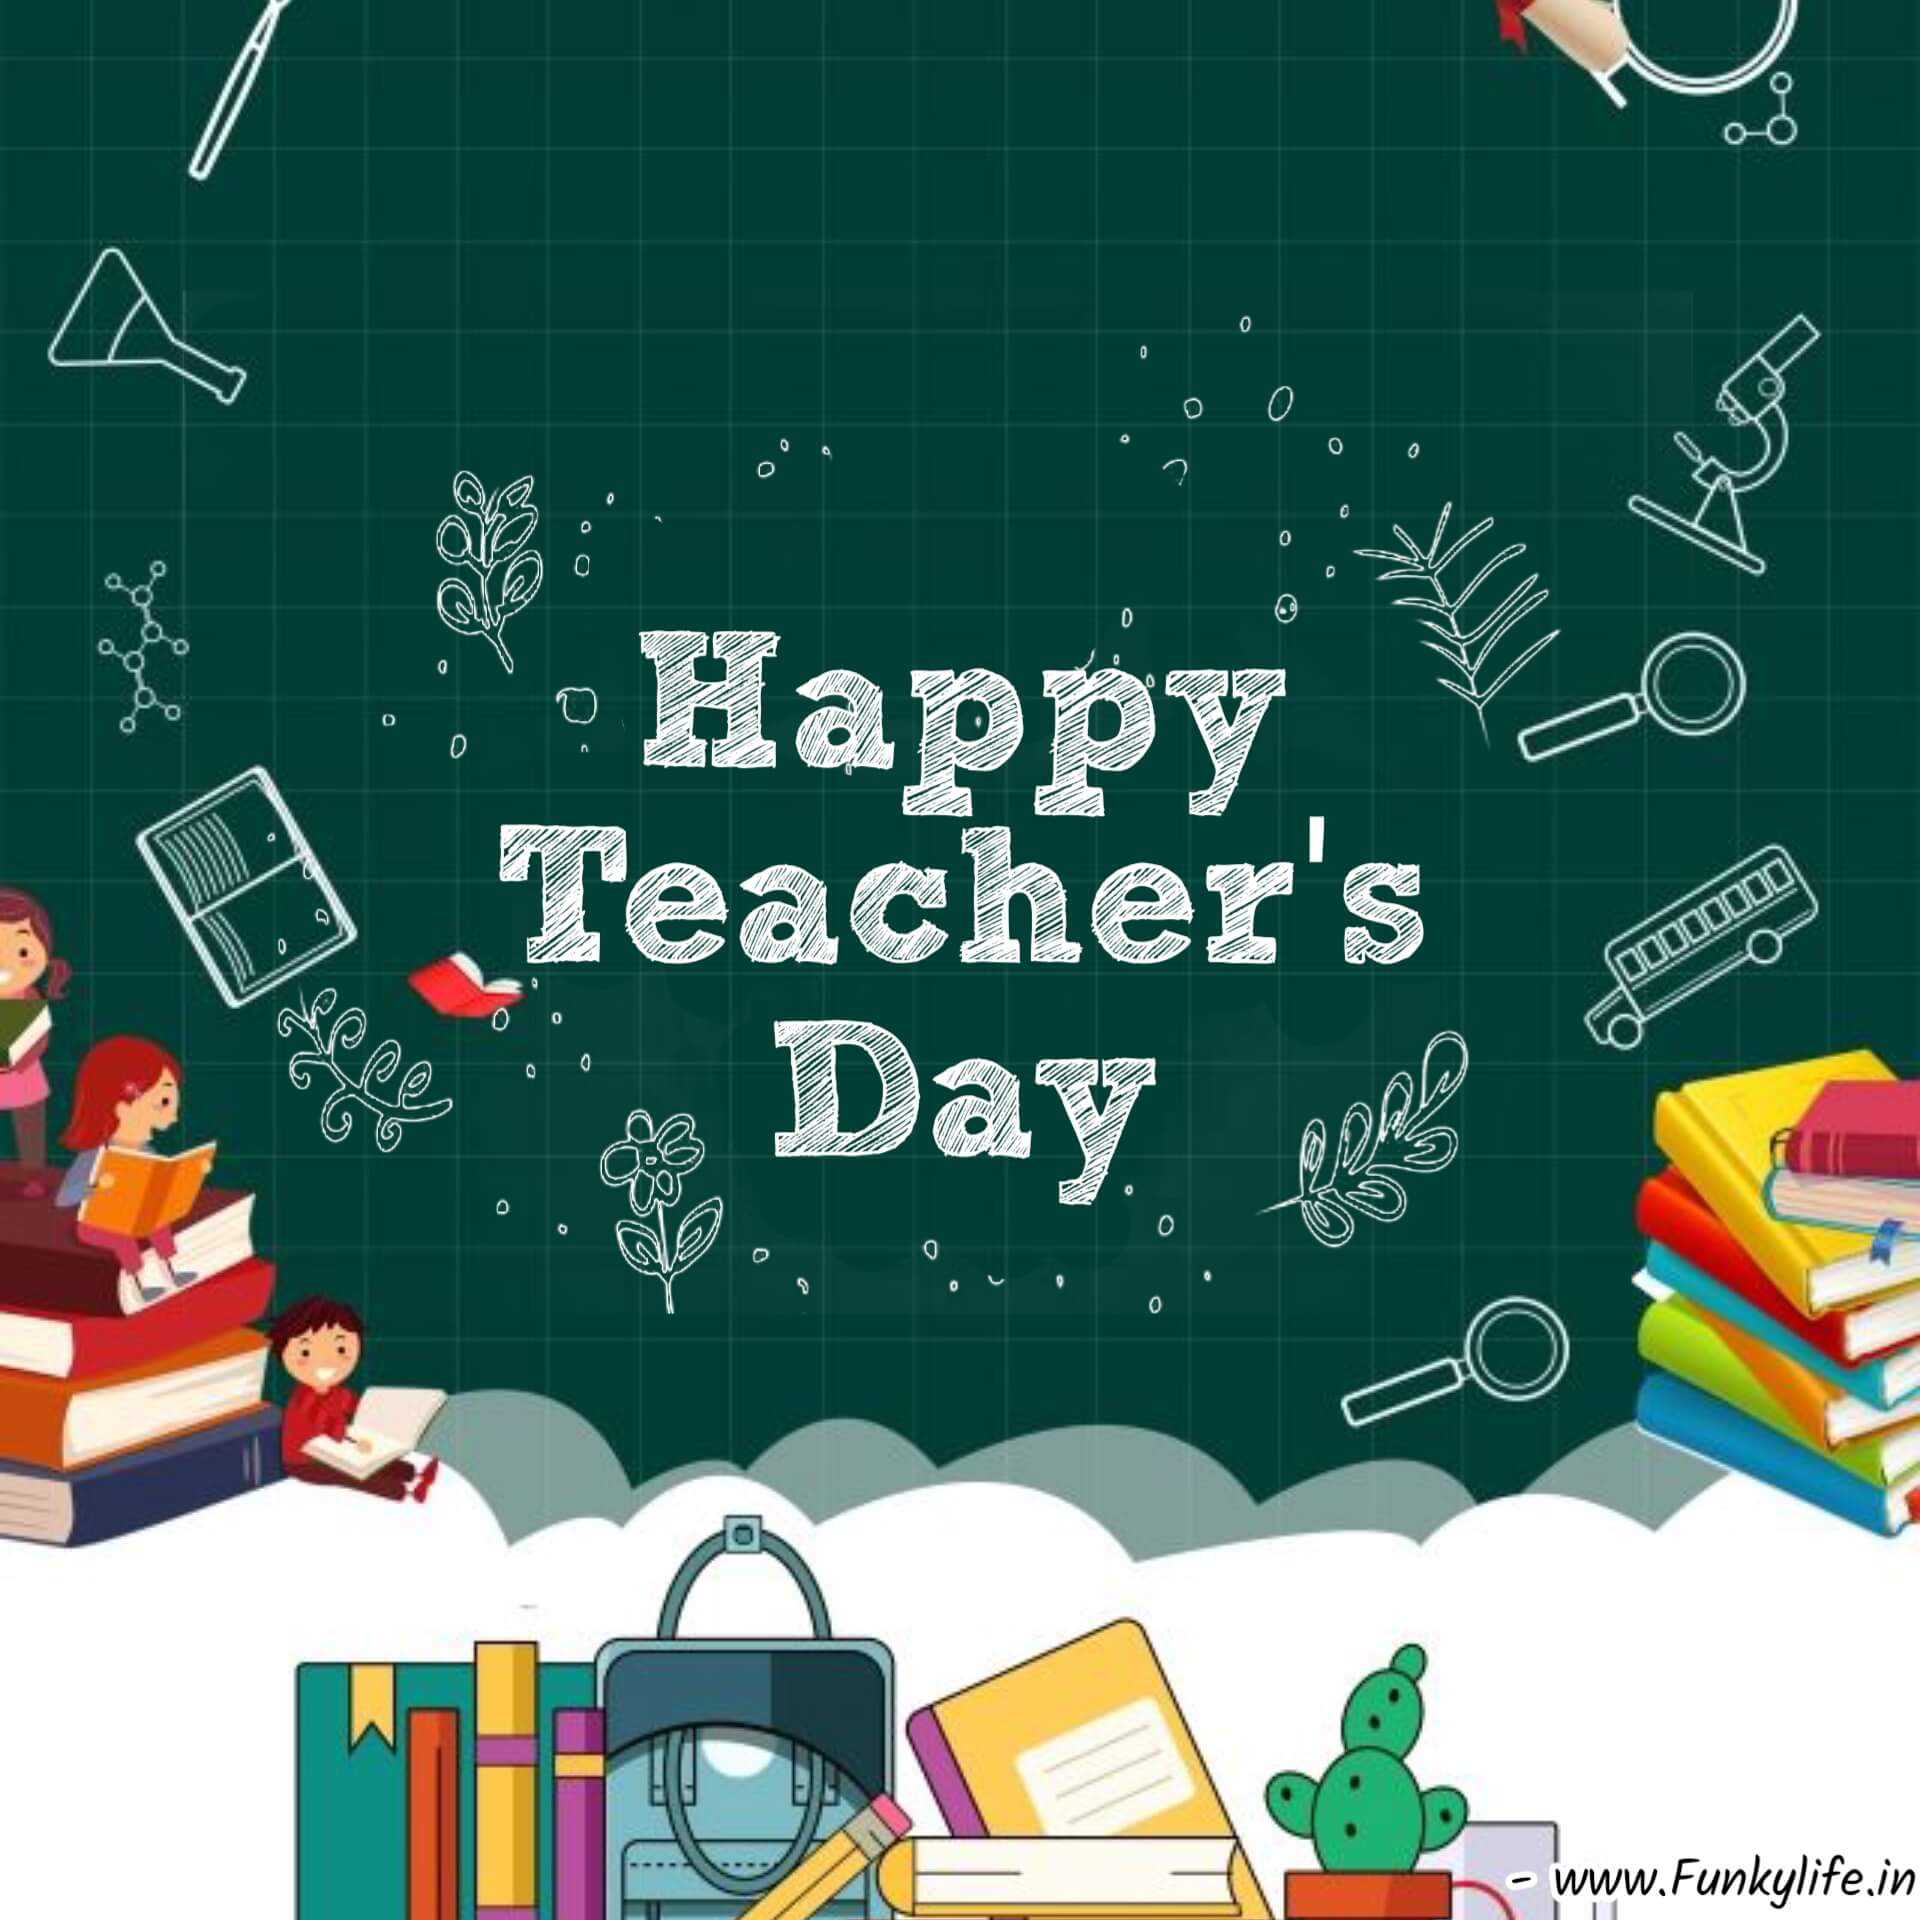 Happy Teacher's Day Wishes Pic